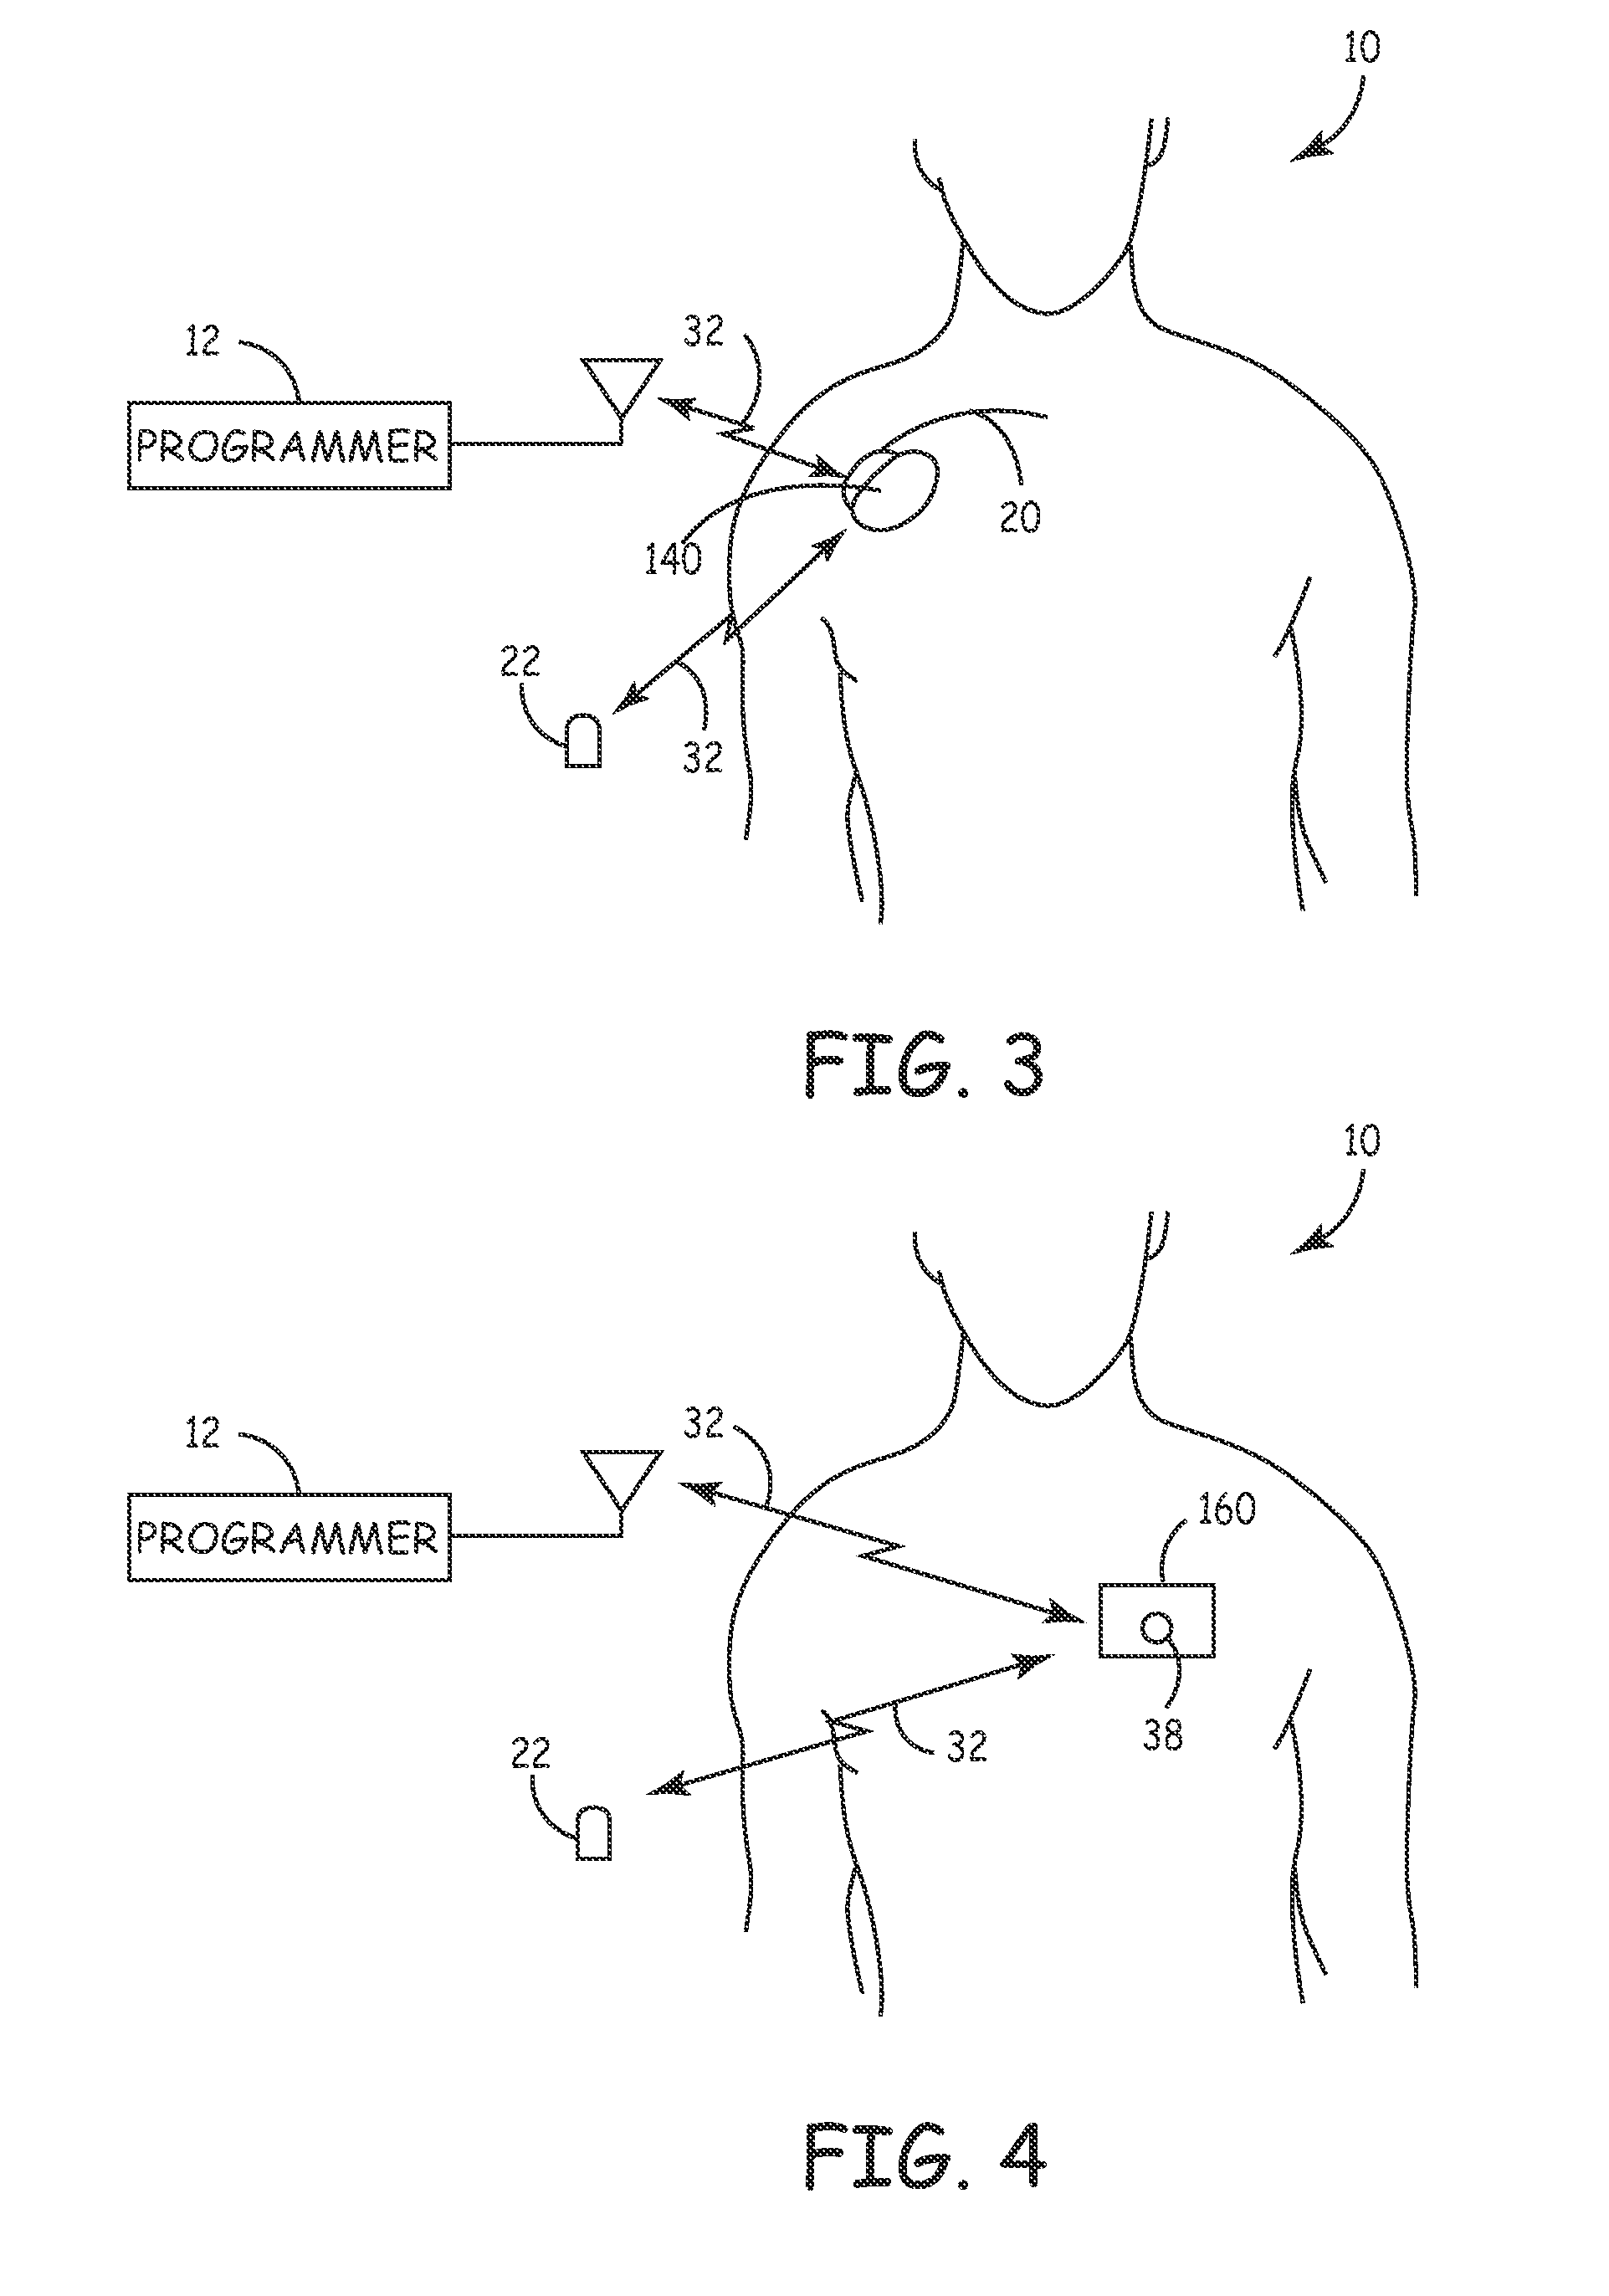 System and method for segmenting a cardiac signal based on brain activity